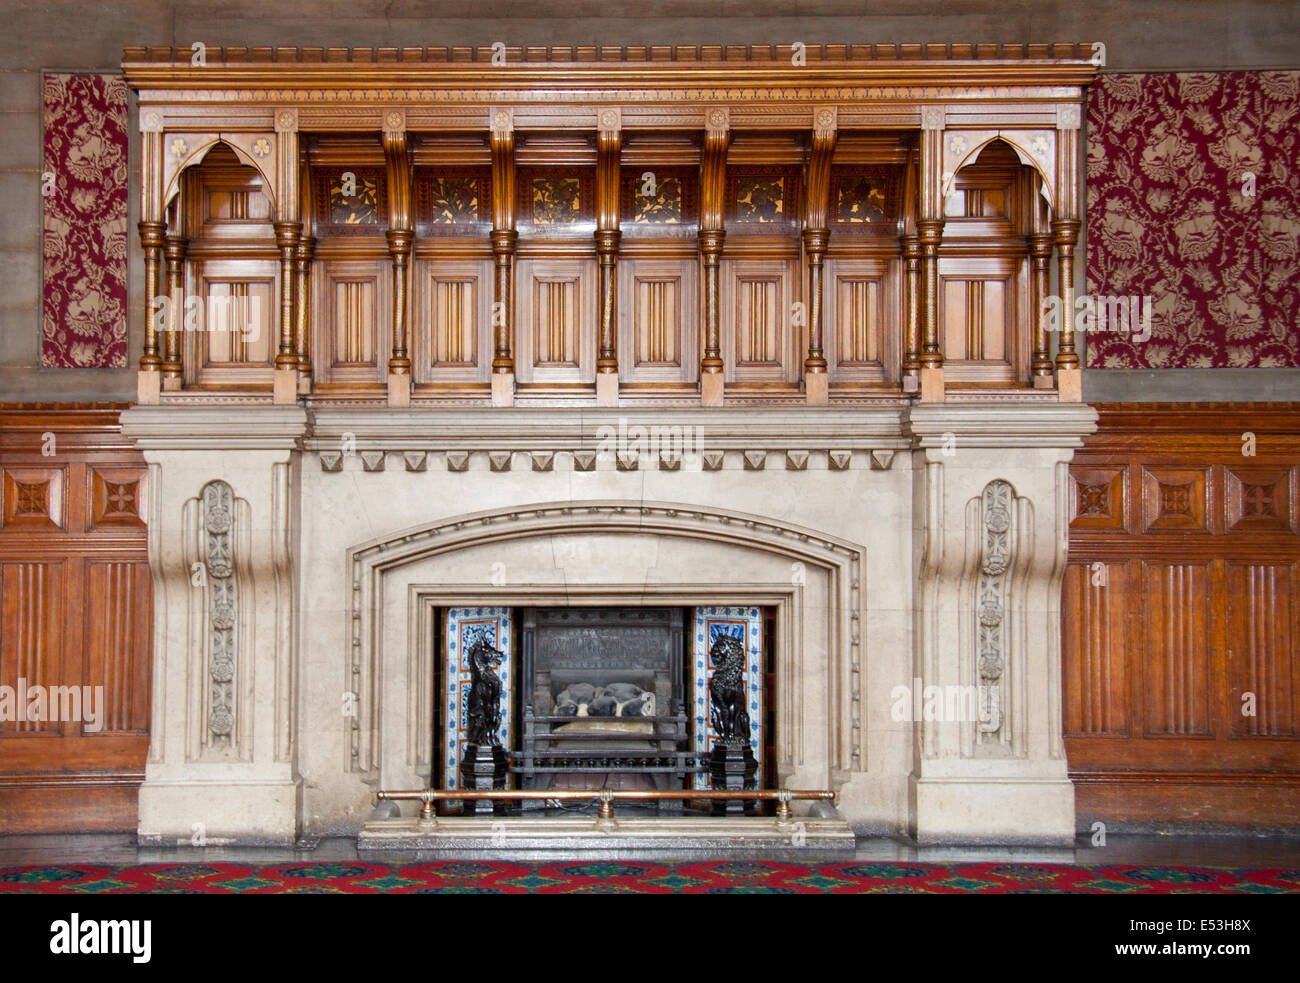 Manchester Town Hall Interior, showing the fireplace in the banqueting room. Stock Photo